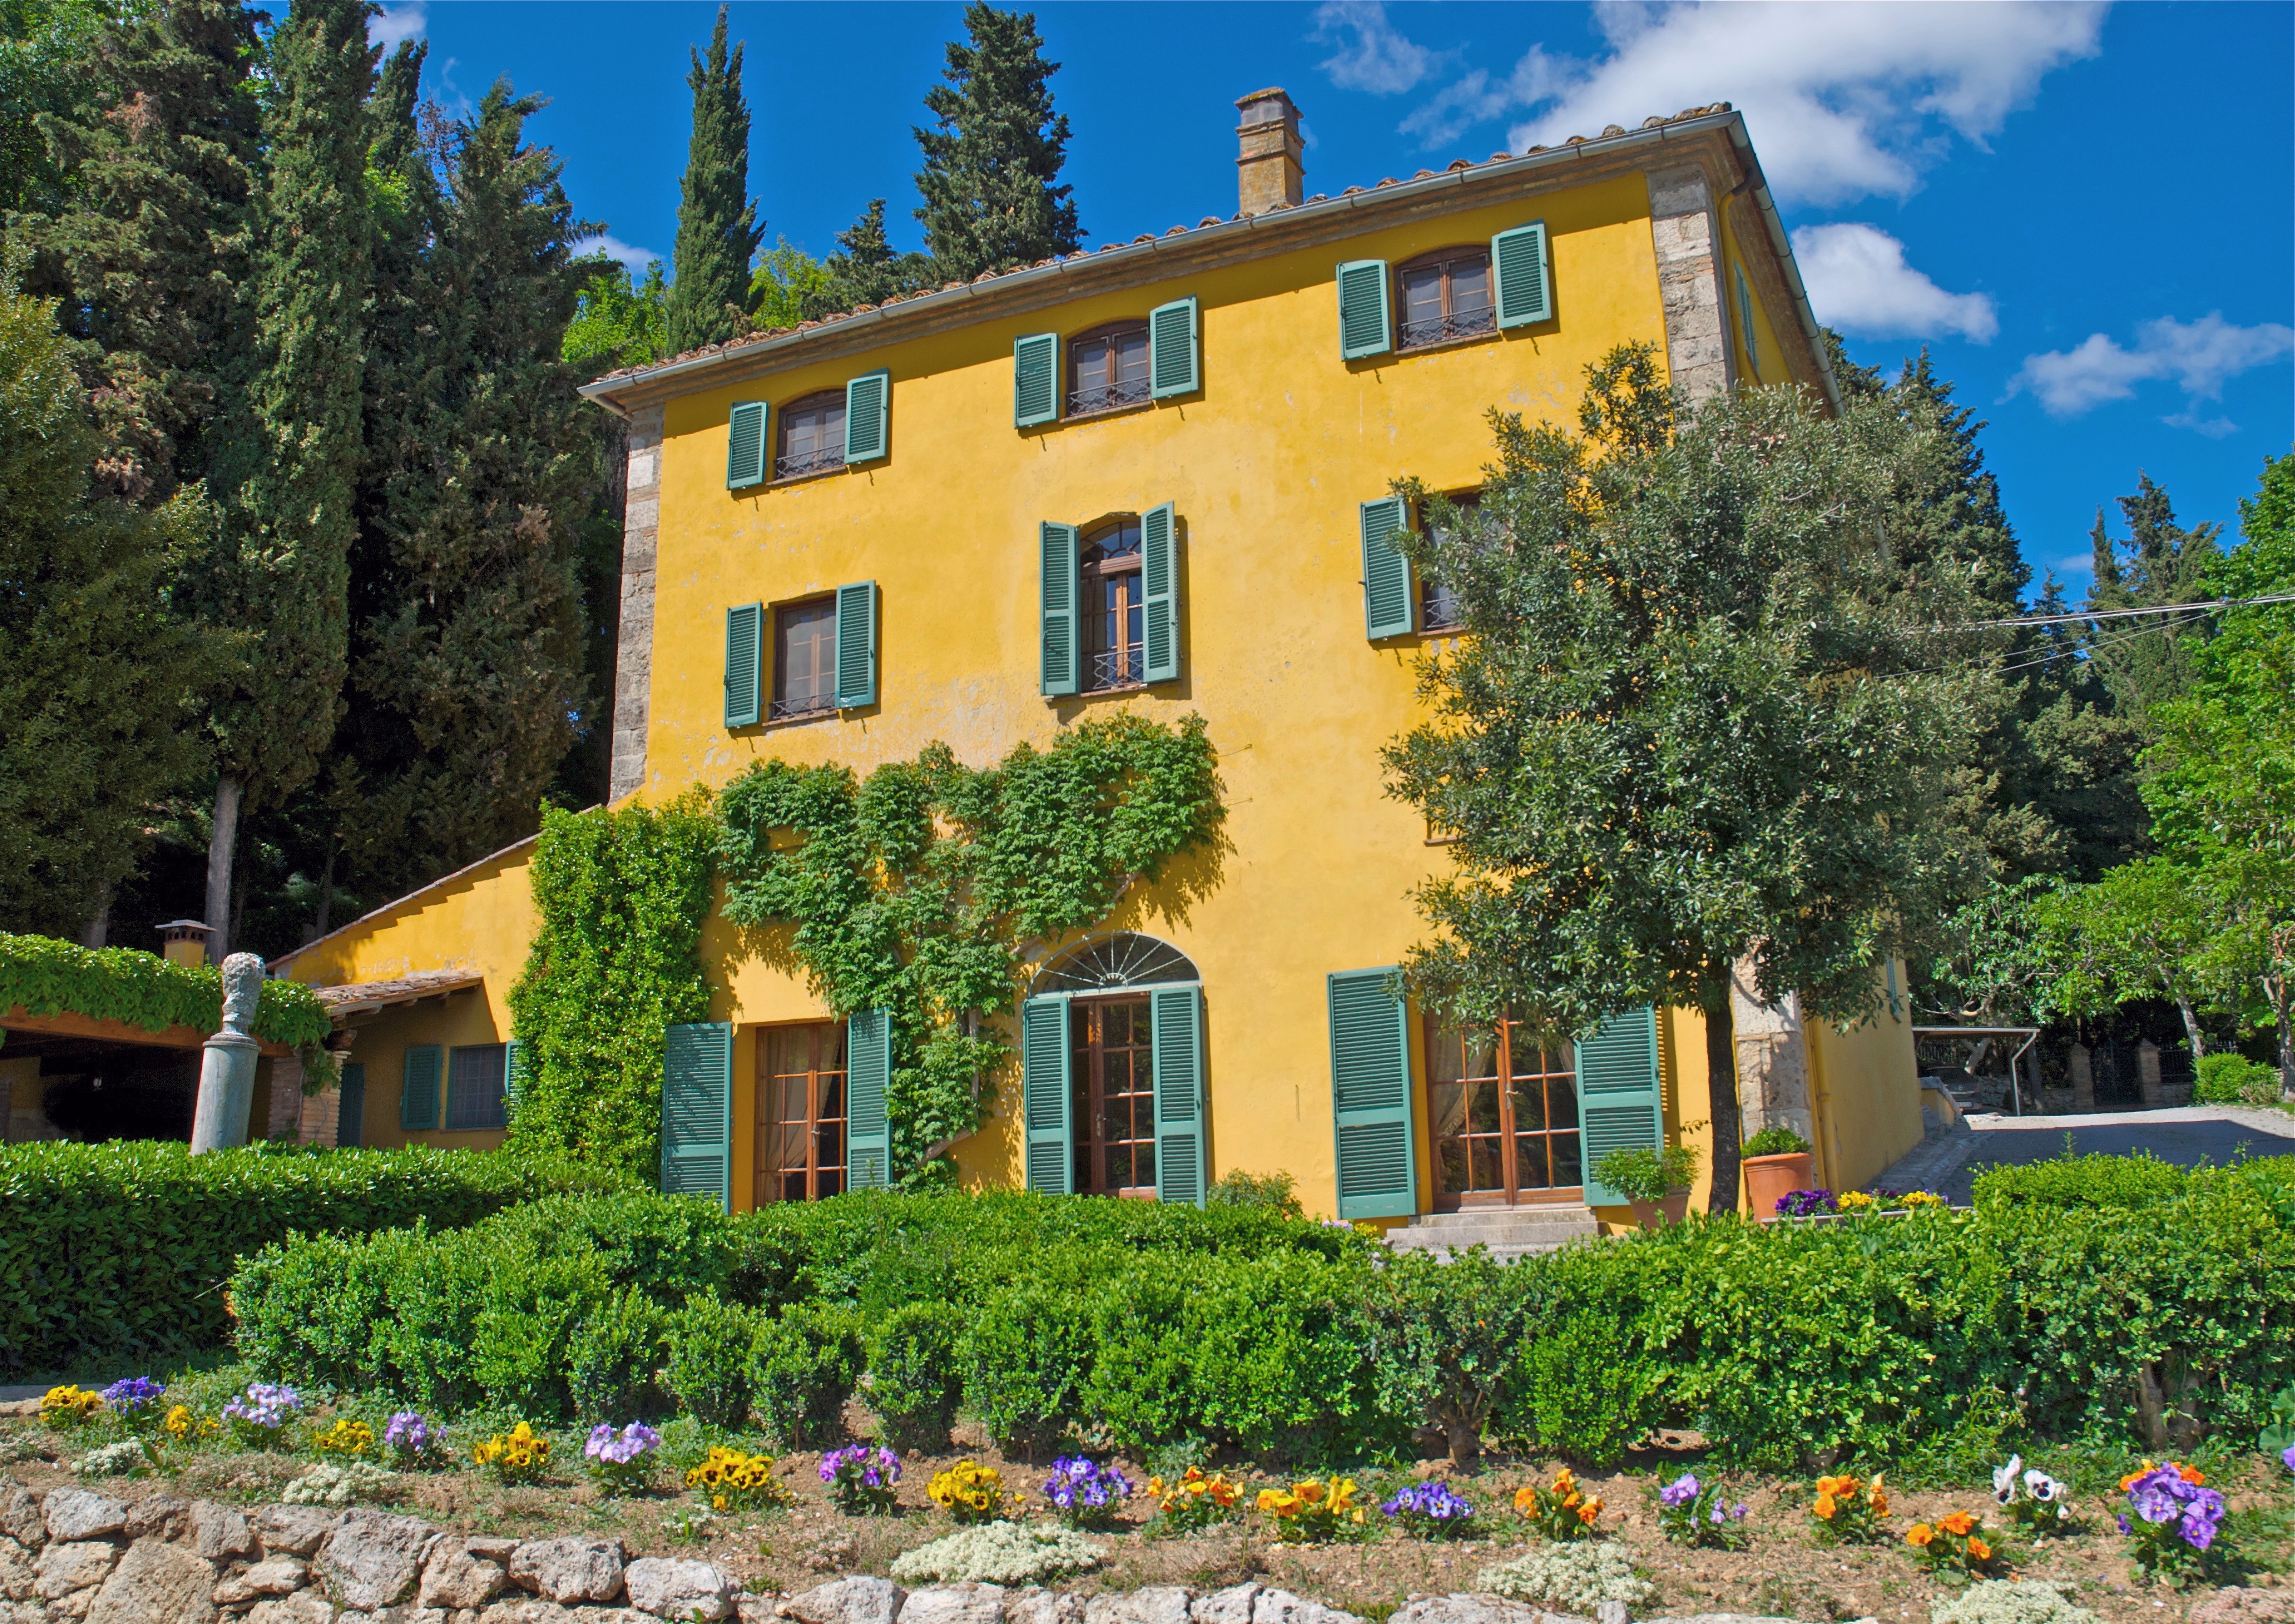 Vallone di Sotto, a Tuscan villa listed for 1.5 million euros (US$1.71 million), on an 86.79 acre estate to be sold by Concierge Auctions via bidding starting July 25. Photo: Handout